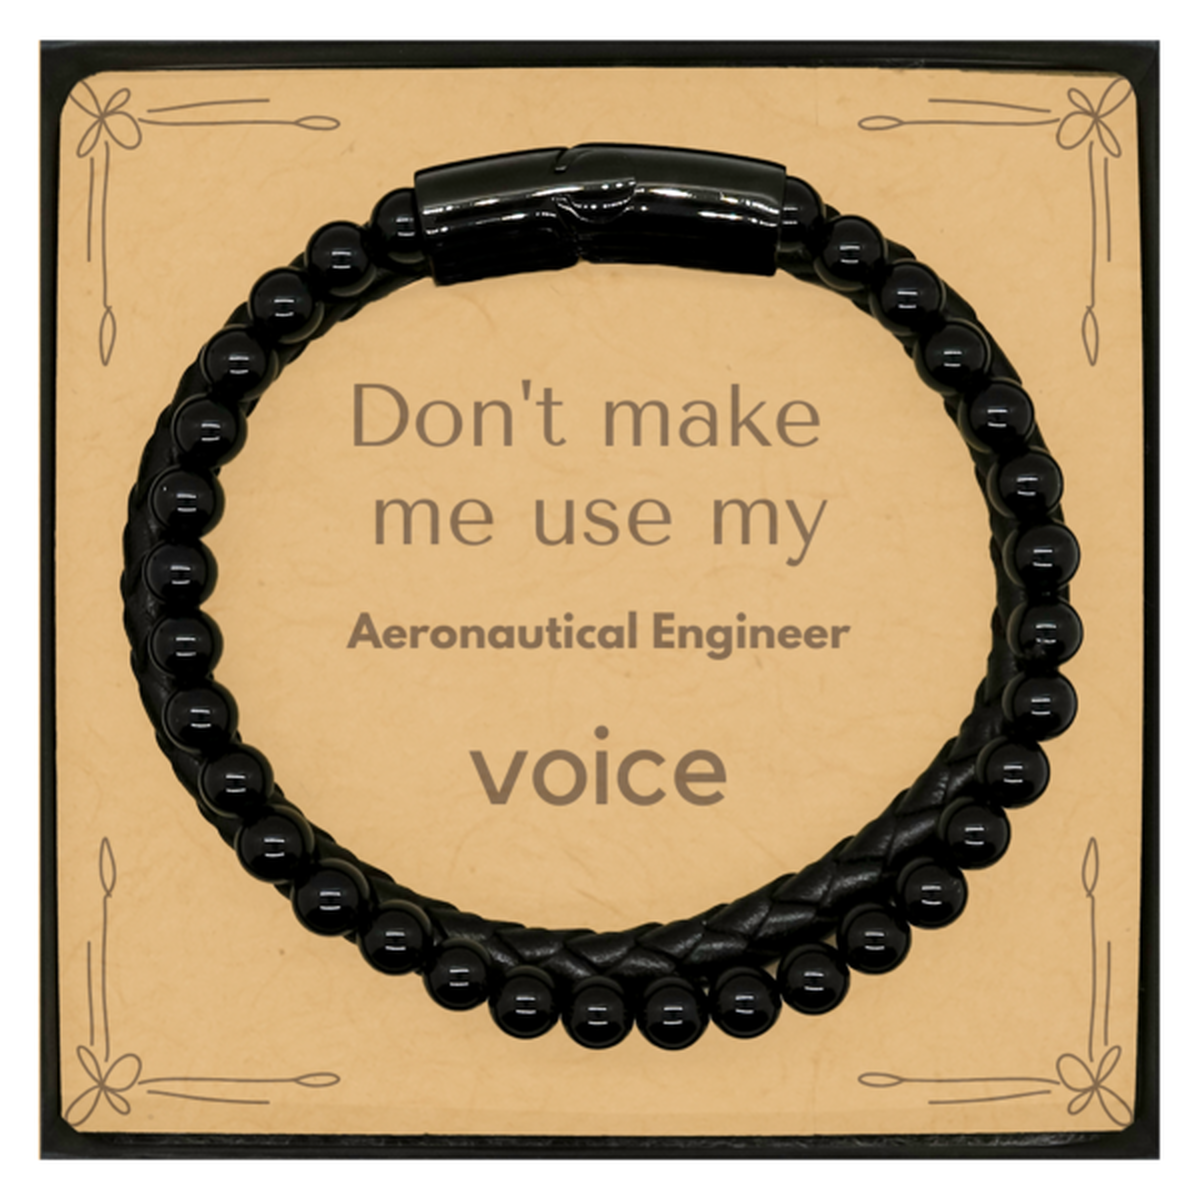 Don't make me use my Aeronautical Engineer voice, Sarcasm Aeronautical Engineer Card Gifts, Christmas Aeronautical Engineer Stone Leather Bracelets Birthday Unique Gifts For Aeronautical Engineer Coworkers, Men, Women, Colleague, Friends